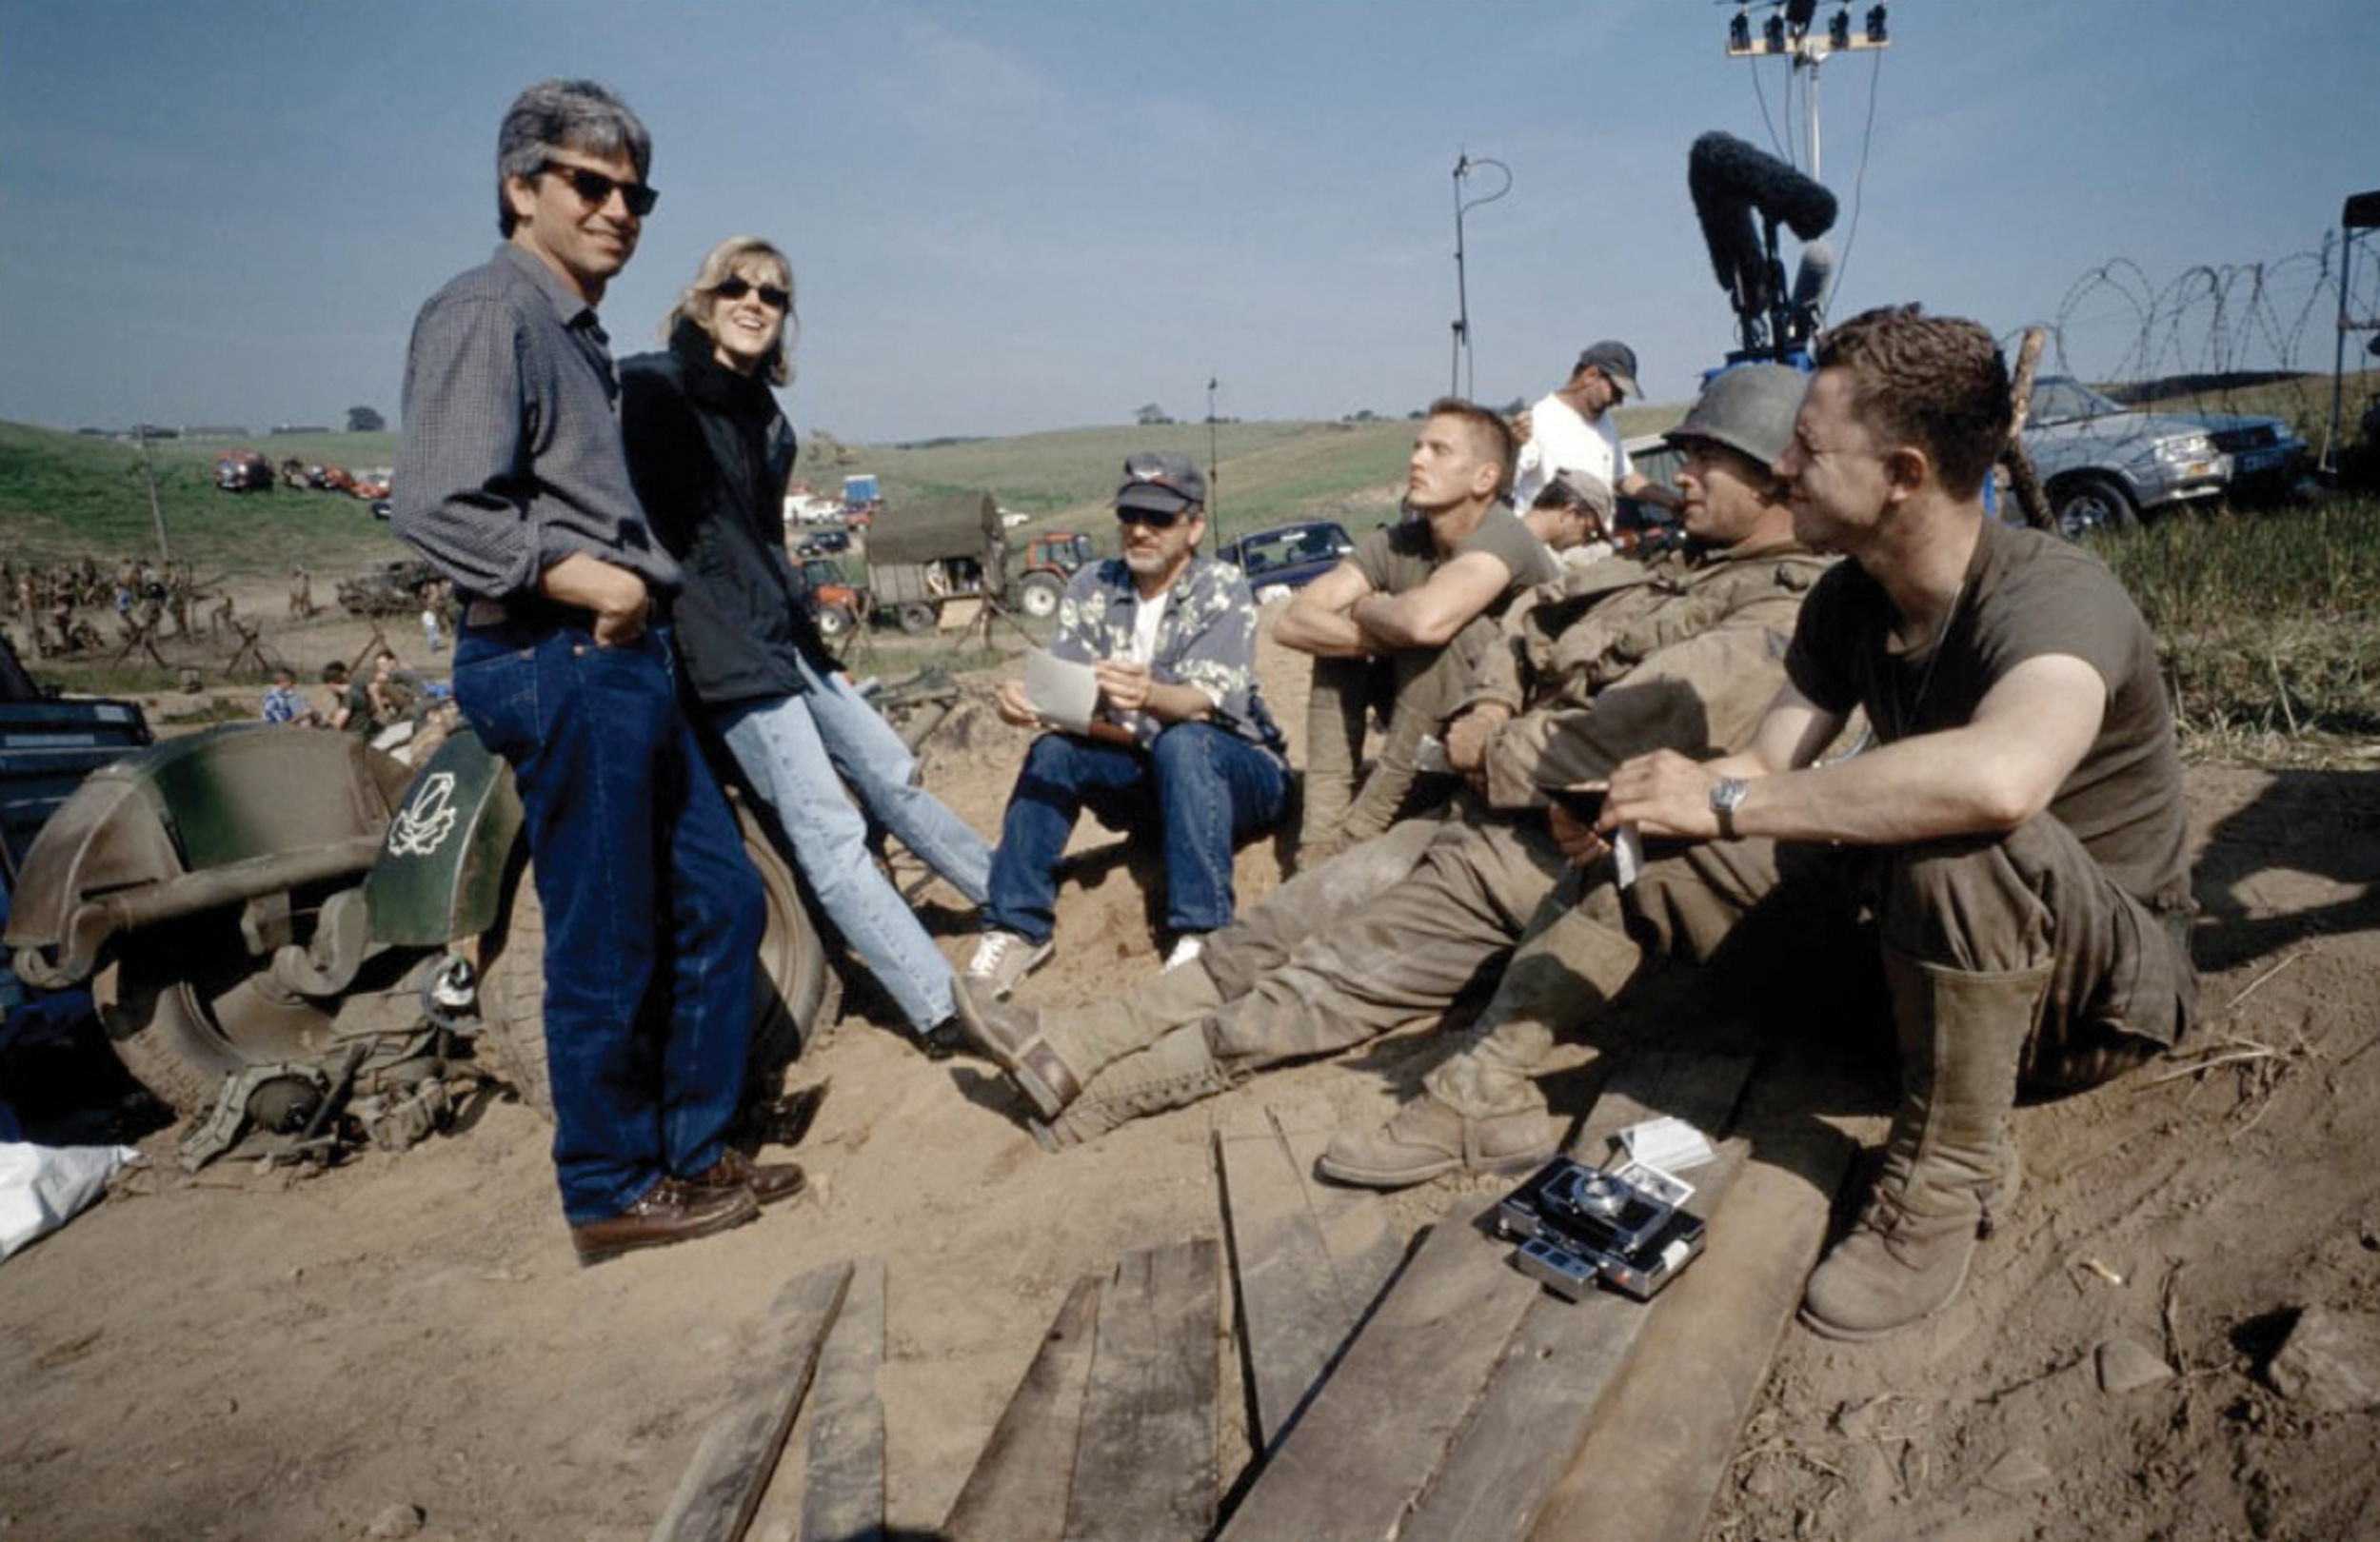 <p>When casting his film, Spielberg said he wanted to cast actors who would look the part. Specifically, he believed that people during World War II looked different than people in the ‘90s. In short, Spielberg wanted the cast to “match the faces I saw on the newsreels" (h/t <a href="https://www.rogerebert.com/interviews/private-spielberg" rel="noopener noreferrer">Roger Ebert</a>).</p><p><a href='https://www.msn.com/en-us/community/channel/vid-cj9pqbr0vn9in2b6ddcd8sfgpfq6x6utp44fssrv6mc2gtybw0us'>Follow us on MSN to see more of our exclusive entertainment content.</a></p>